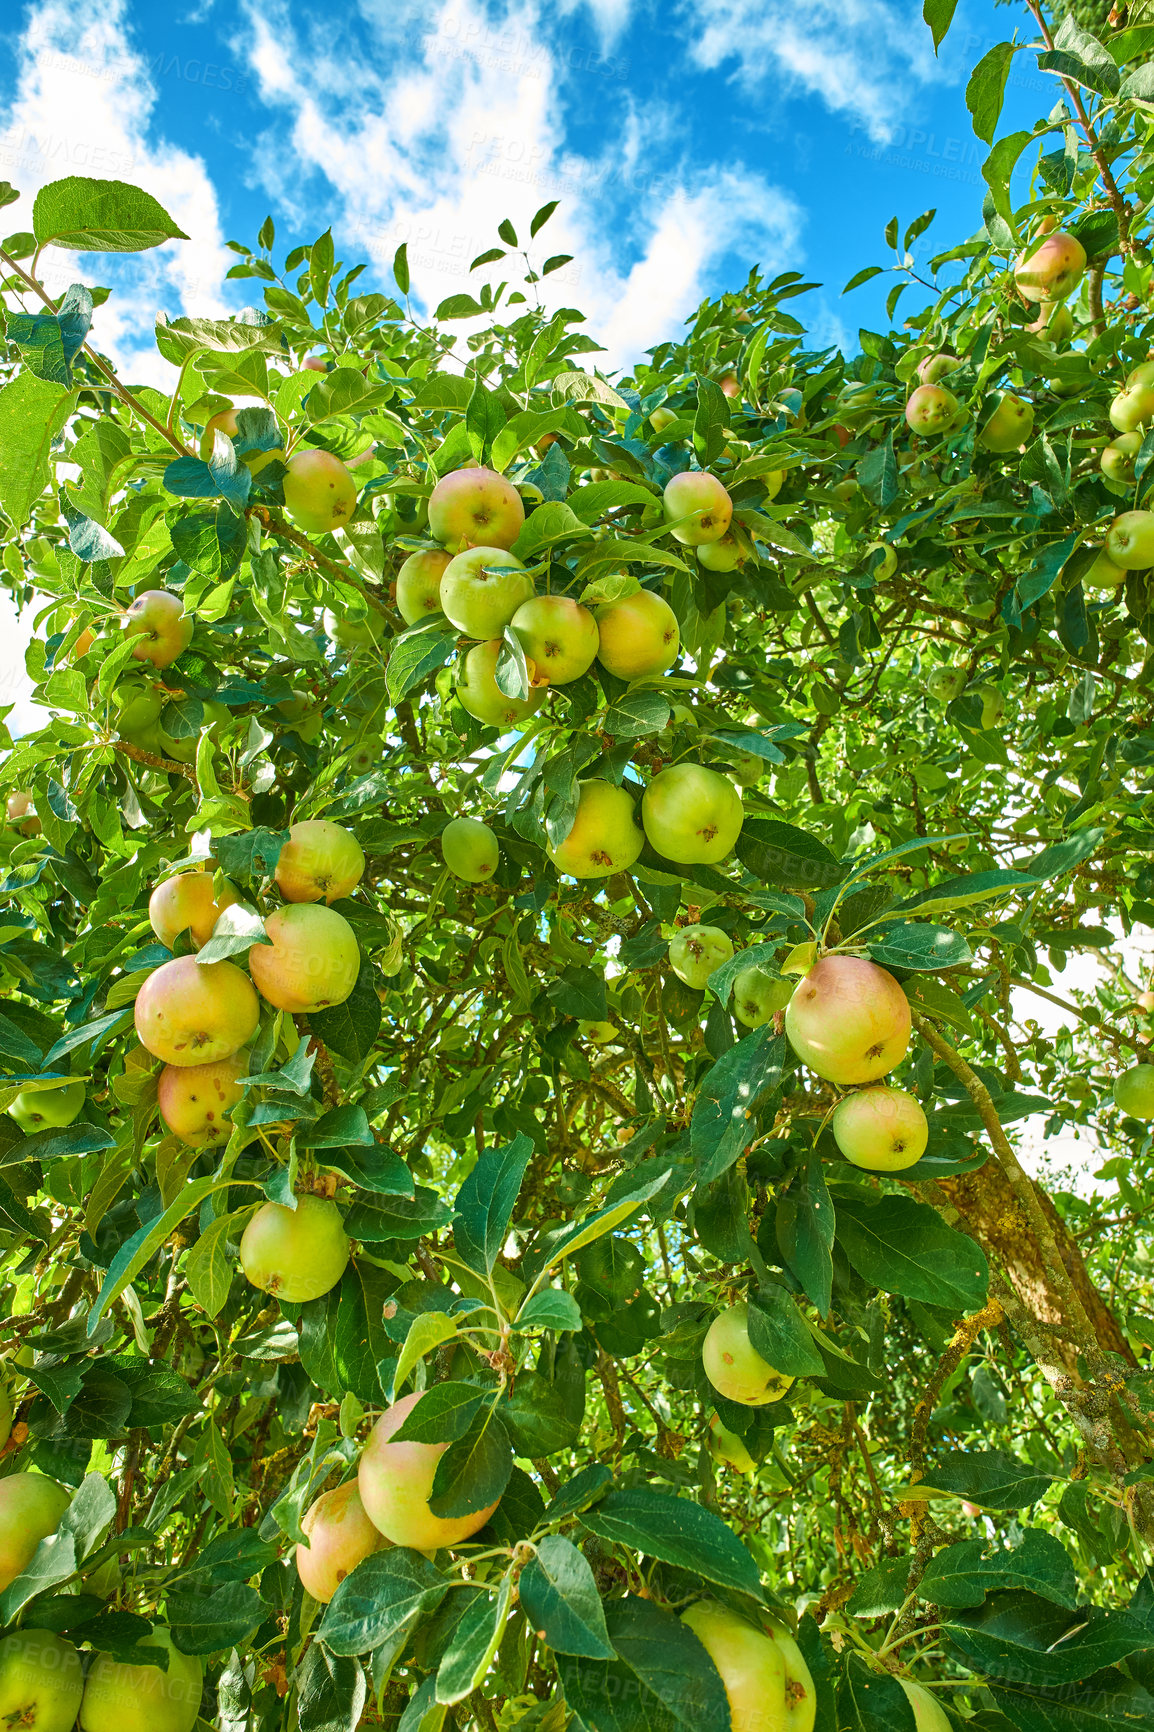 Buy stock photo Many green apples on a tree from below, in an orchard outside against a cloudy blue sky. Fresh produce ready for harvest on farm. Organic and sustainable fruit growing on agricultural land